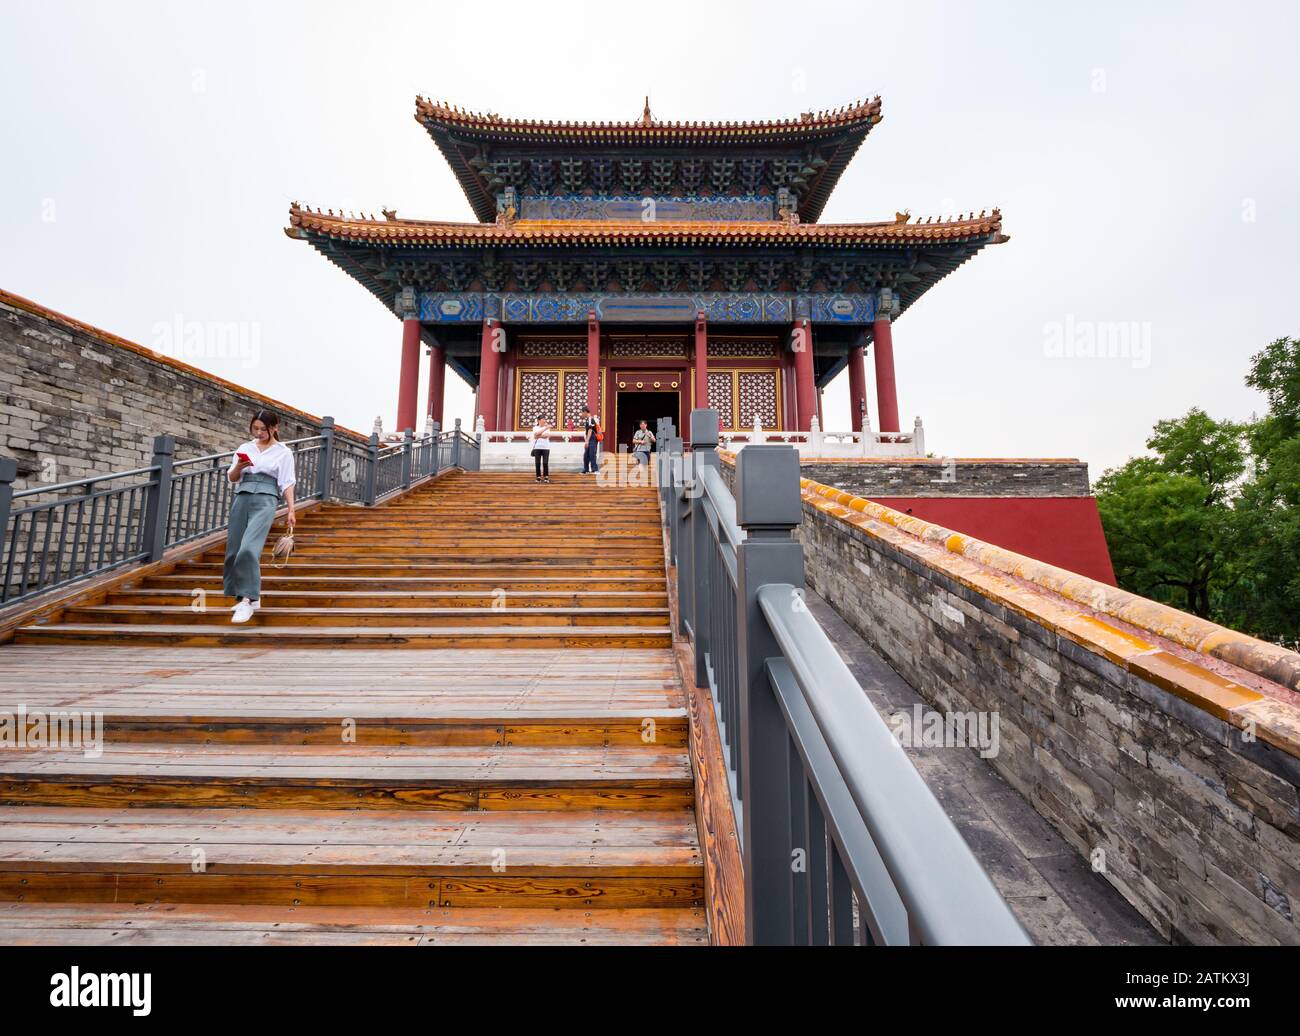 Asian woman looking at mobile phone walking down steps, East Prosperity Gate, Inner Court, Forbidden City, Beijing, China Stock Photo